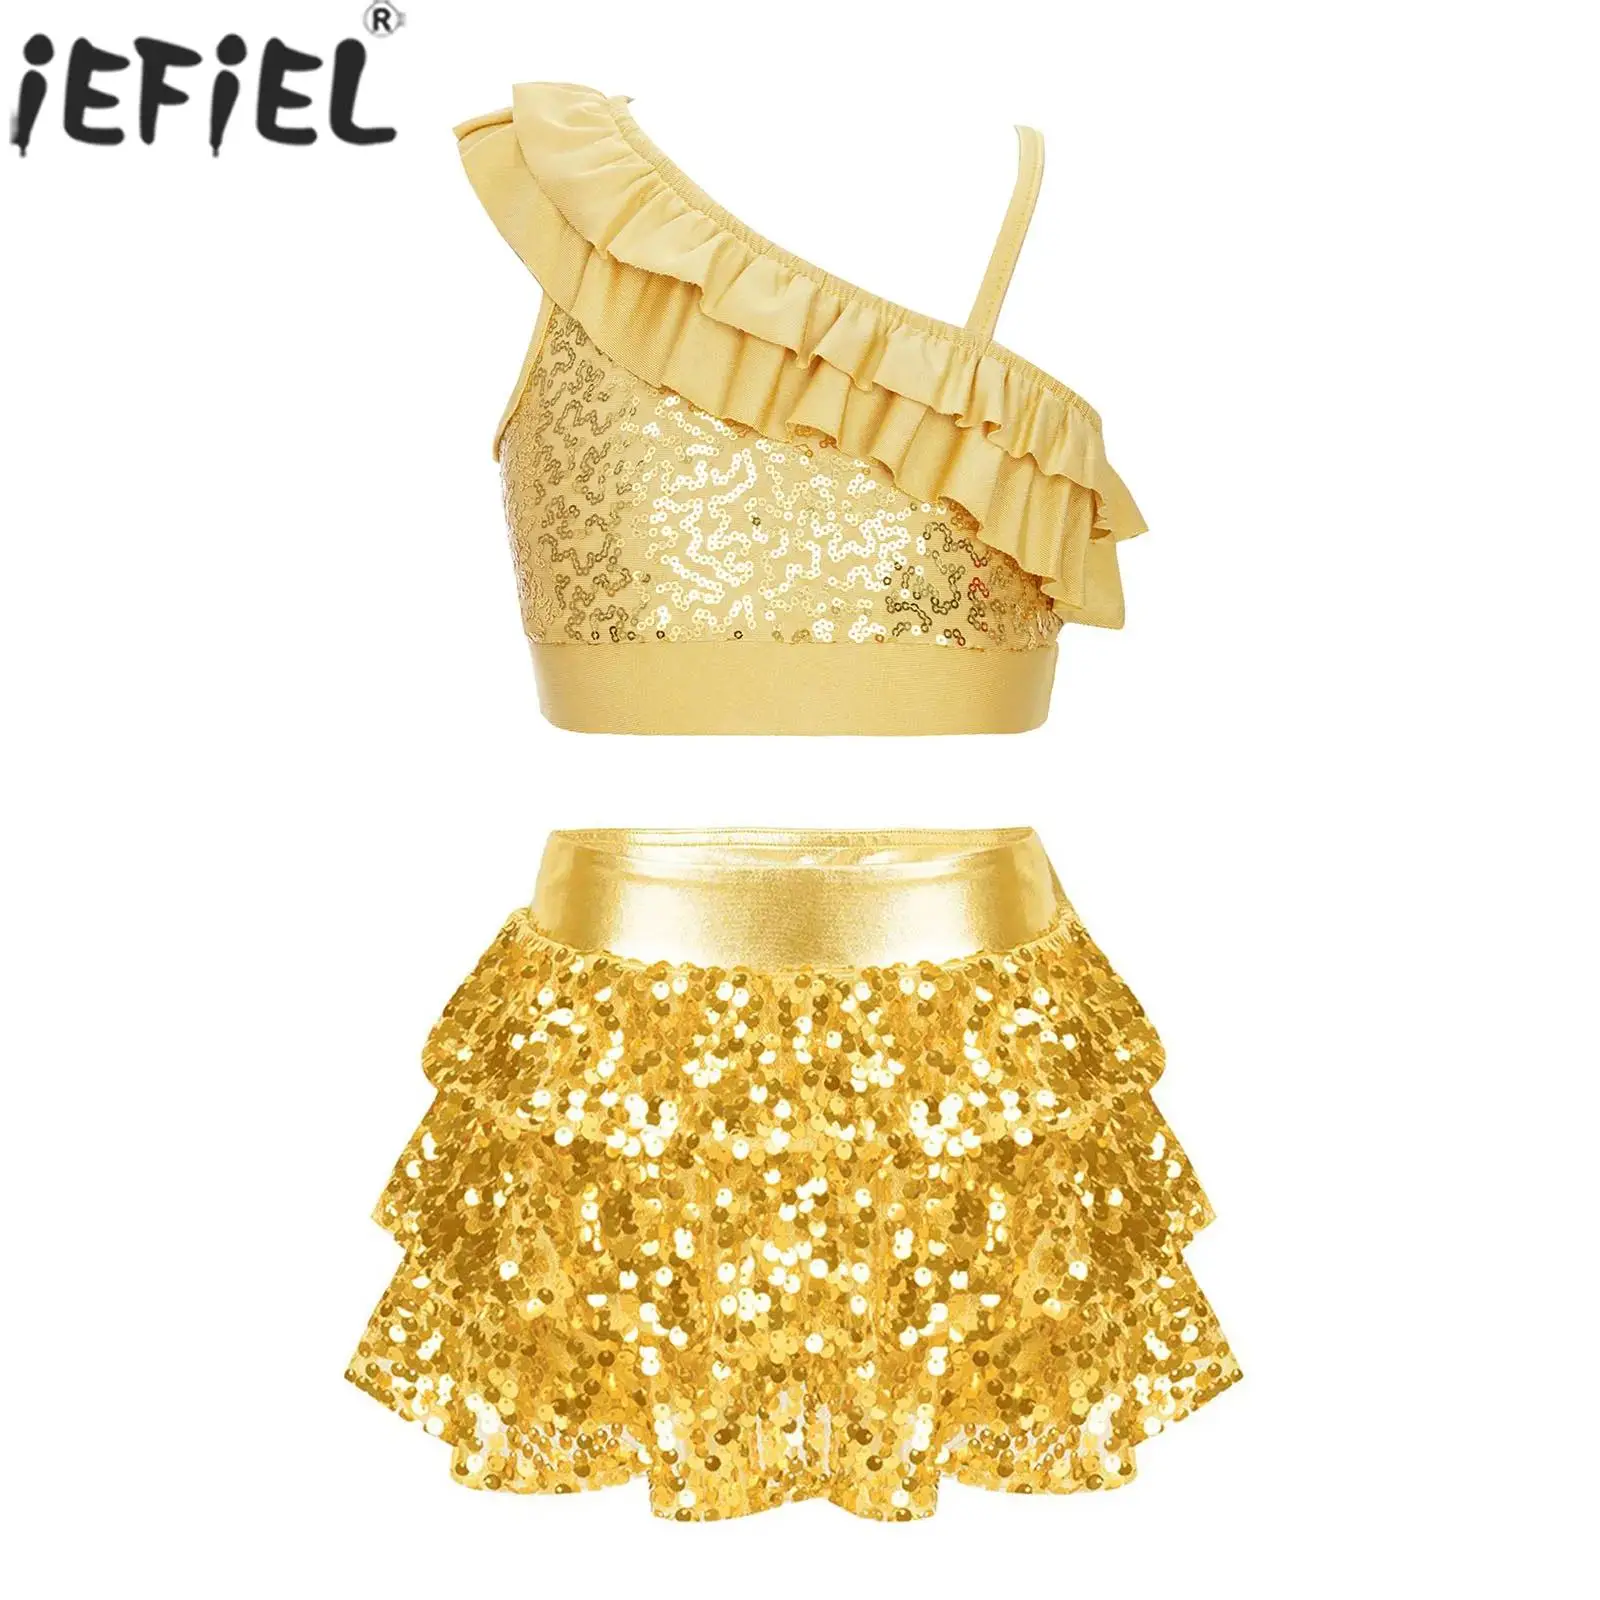 

Girls Shiny Sequin Jazz Dance Outfit Hip Hop Street Dancing Performance Costume Crop Top with Tiered Culottes Party Dancewear